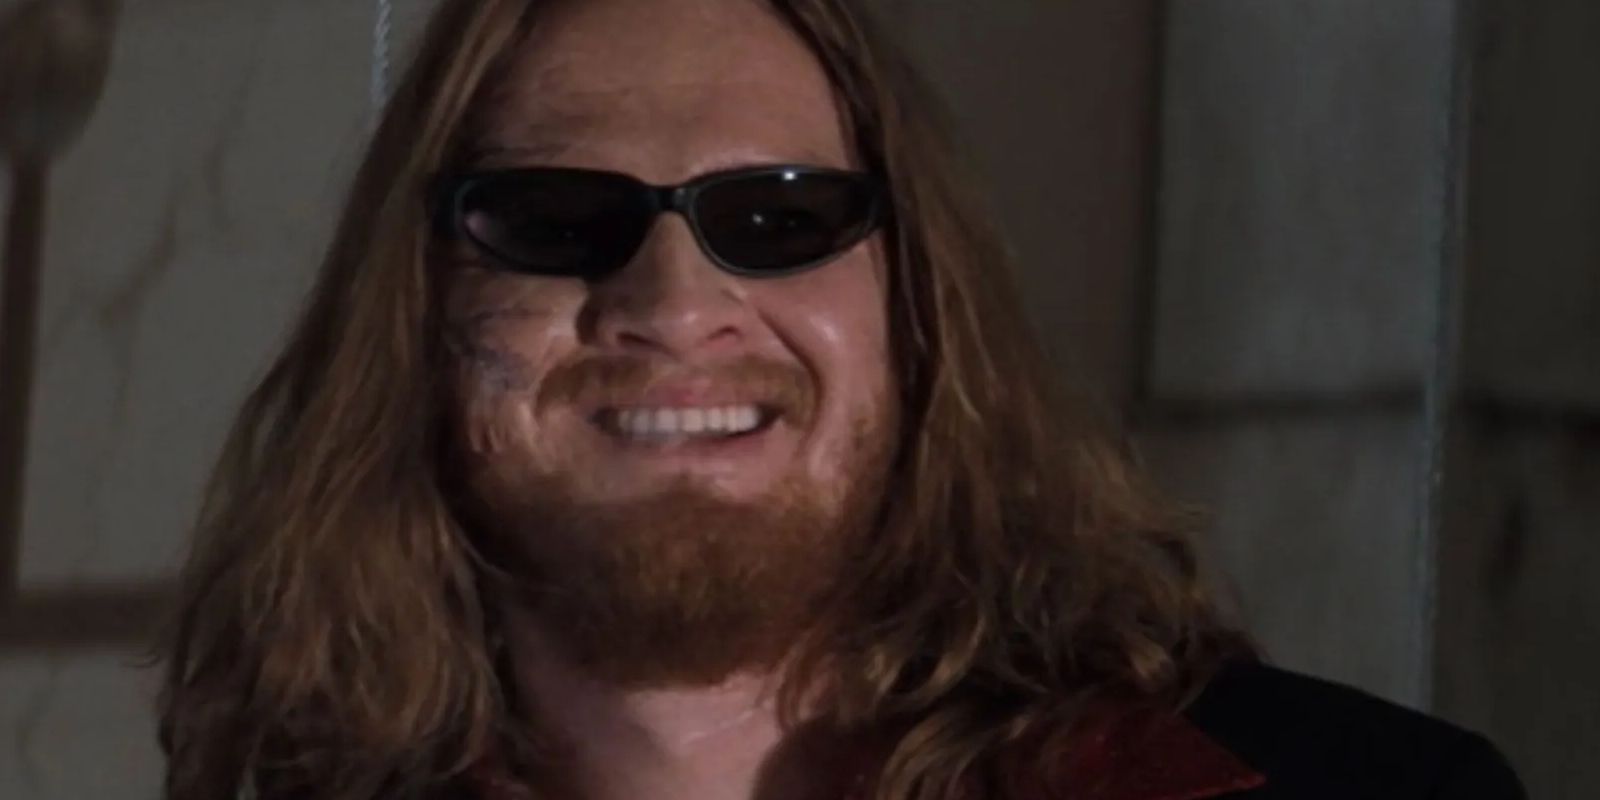 Donal Logue as Scud smiling with sunglasses on